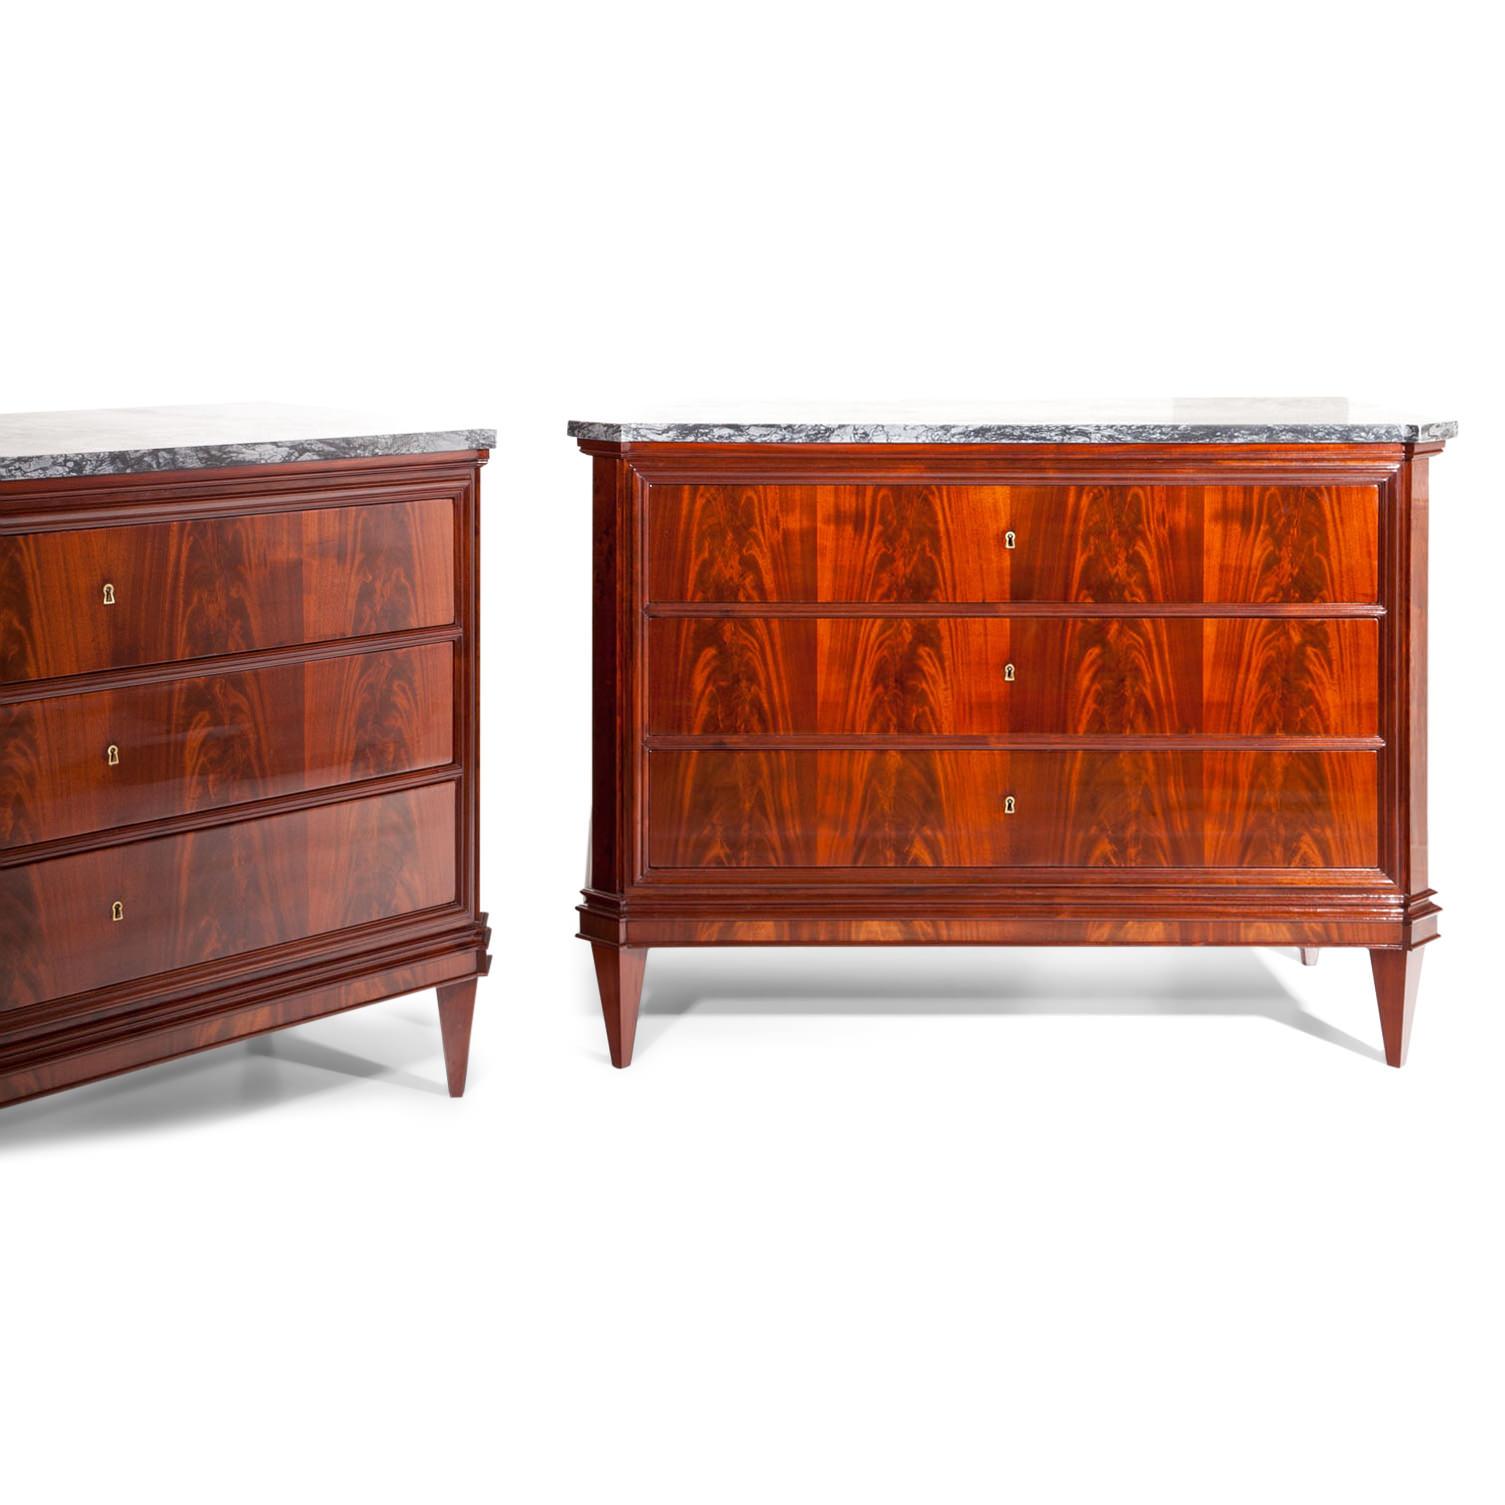 Italian Neoclassical Chests of Drawers, Italy First Half of the 19th Century